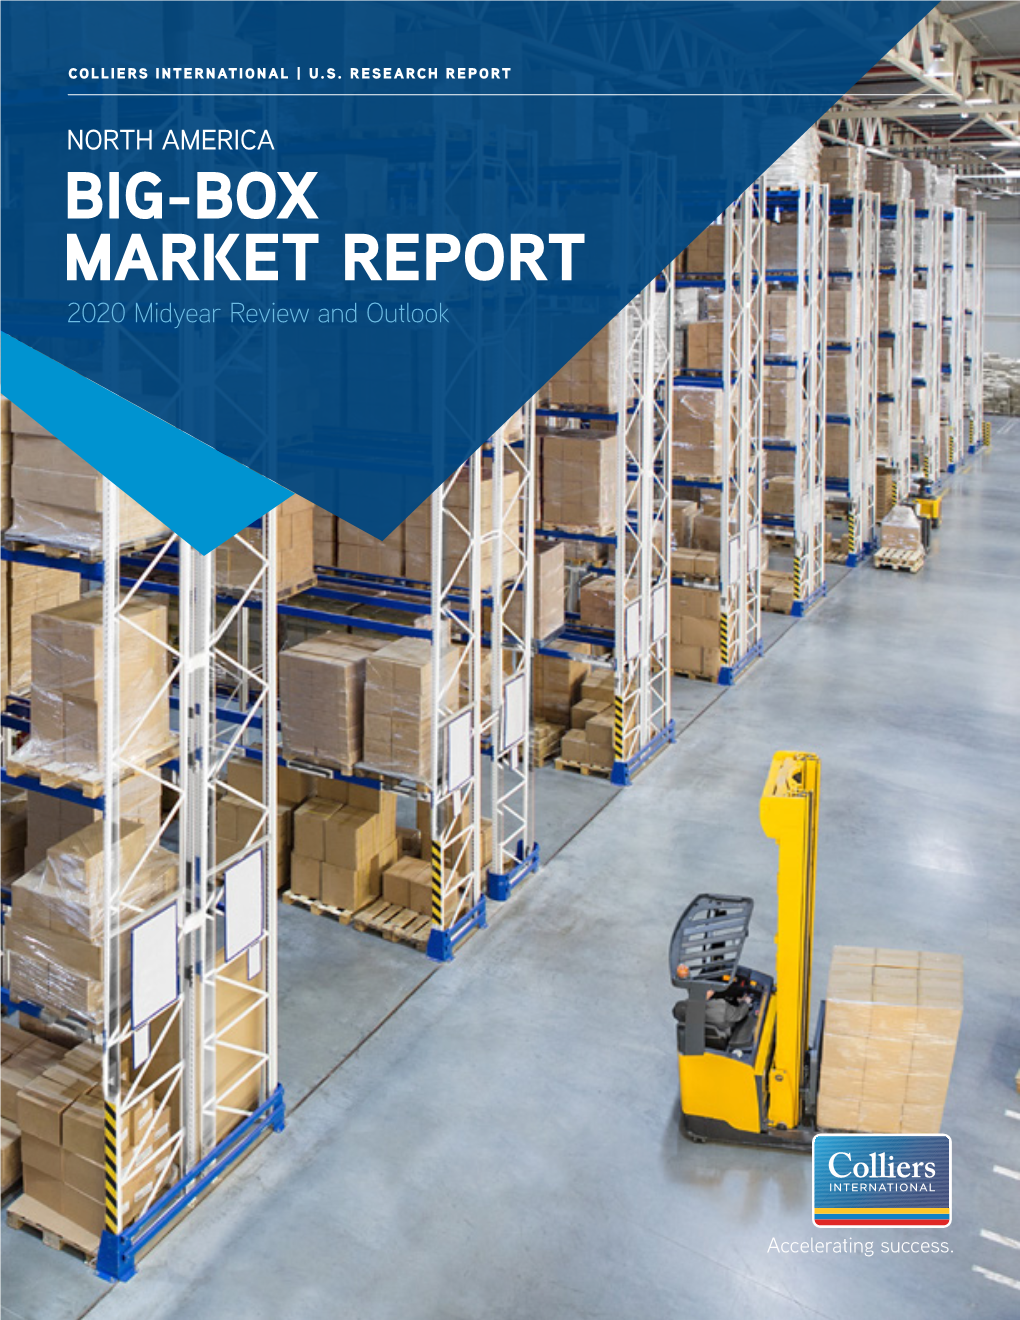 NORTH AMERICA BIG-BOX MARKET REPORT 2020 Midyear Review and Outlook Copyright © 2020 Colliers International